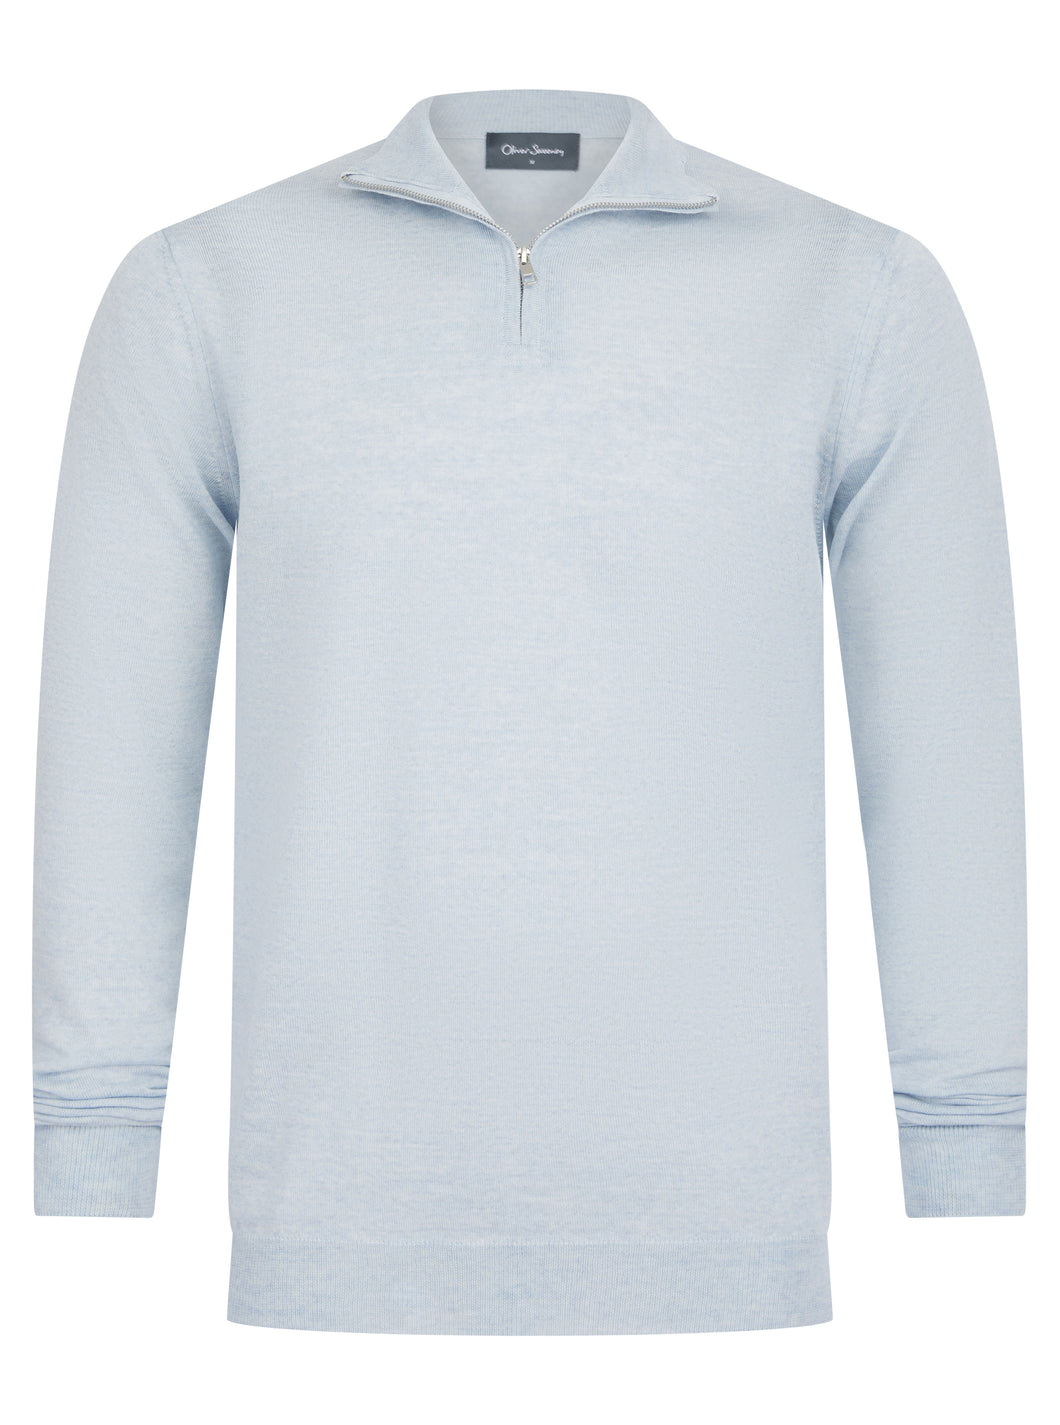 Oliver Sweeney Curragh 1/4 Zip Knit Sky